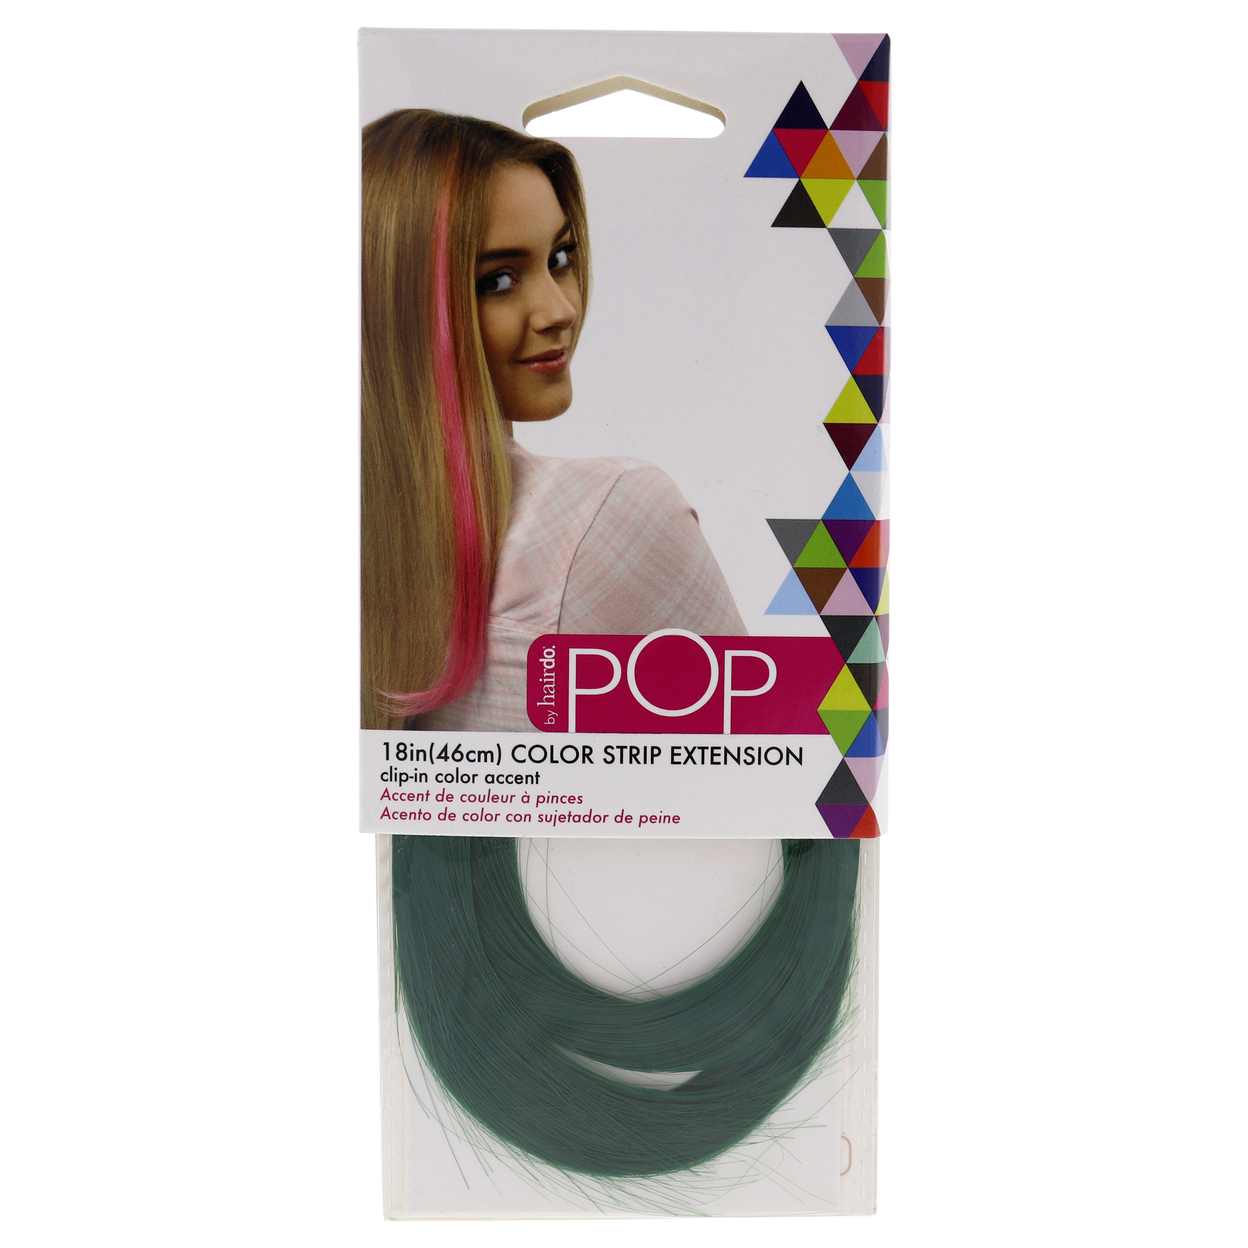 Hairdo Pop Color Strip Extension - Party Dress Green Hair Extension 18 Inch